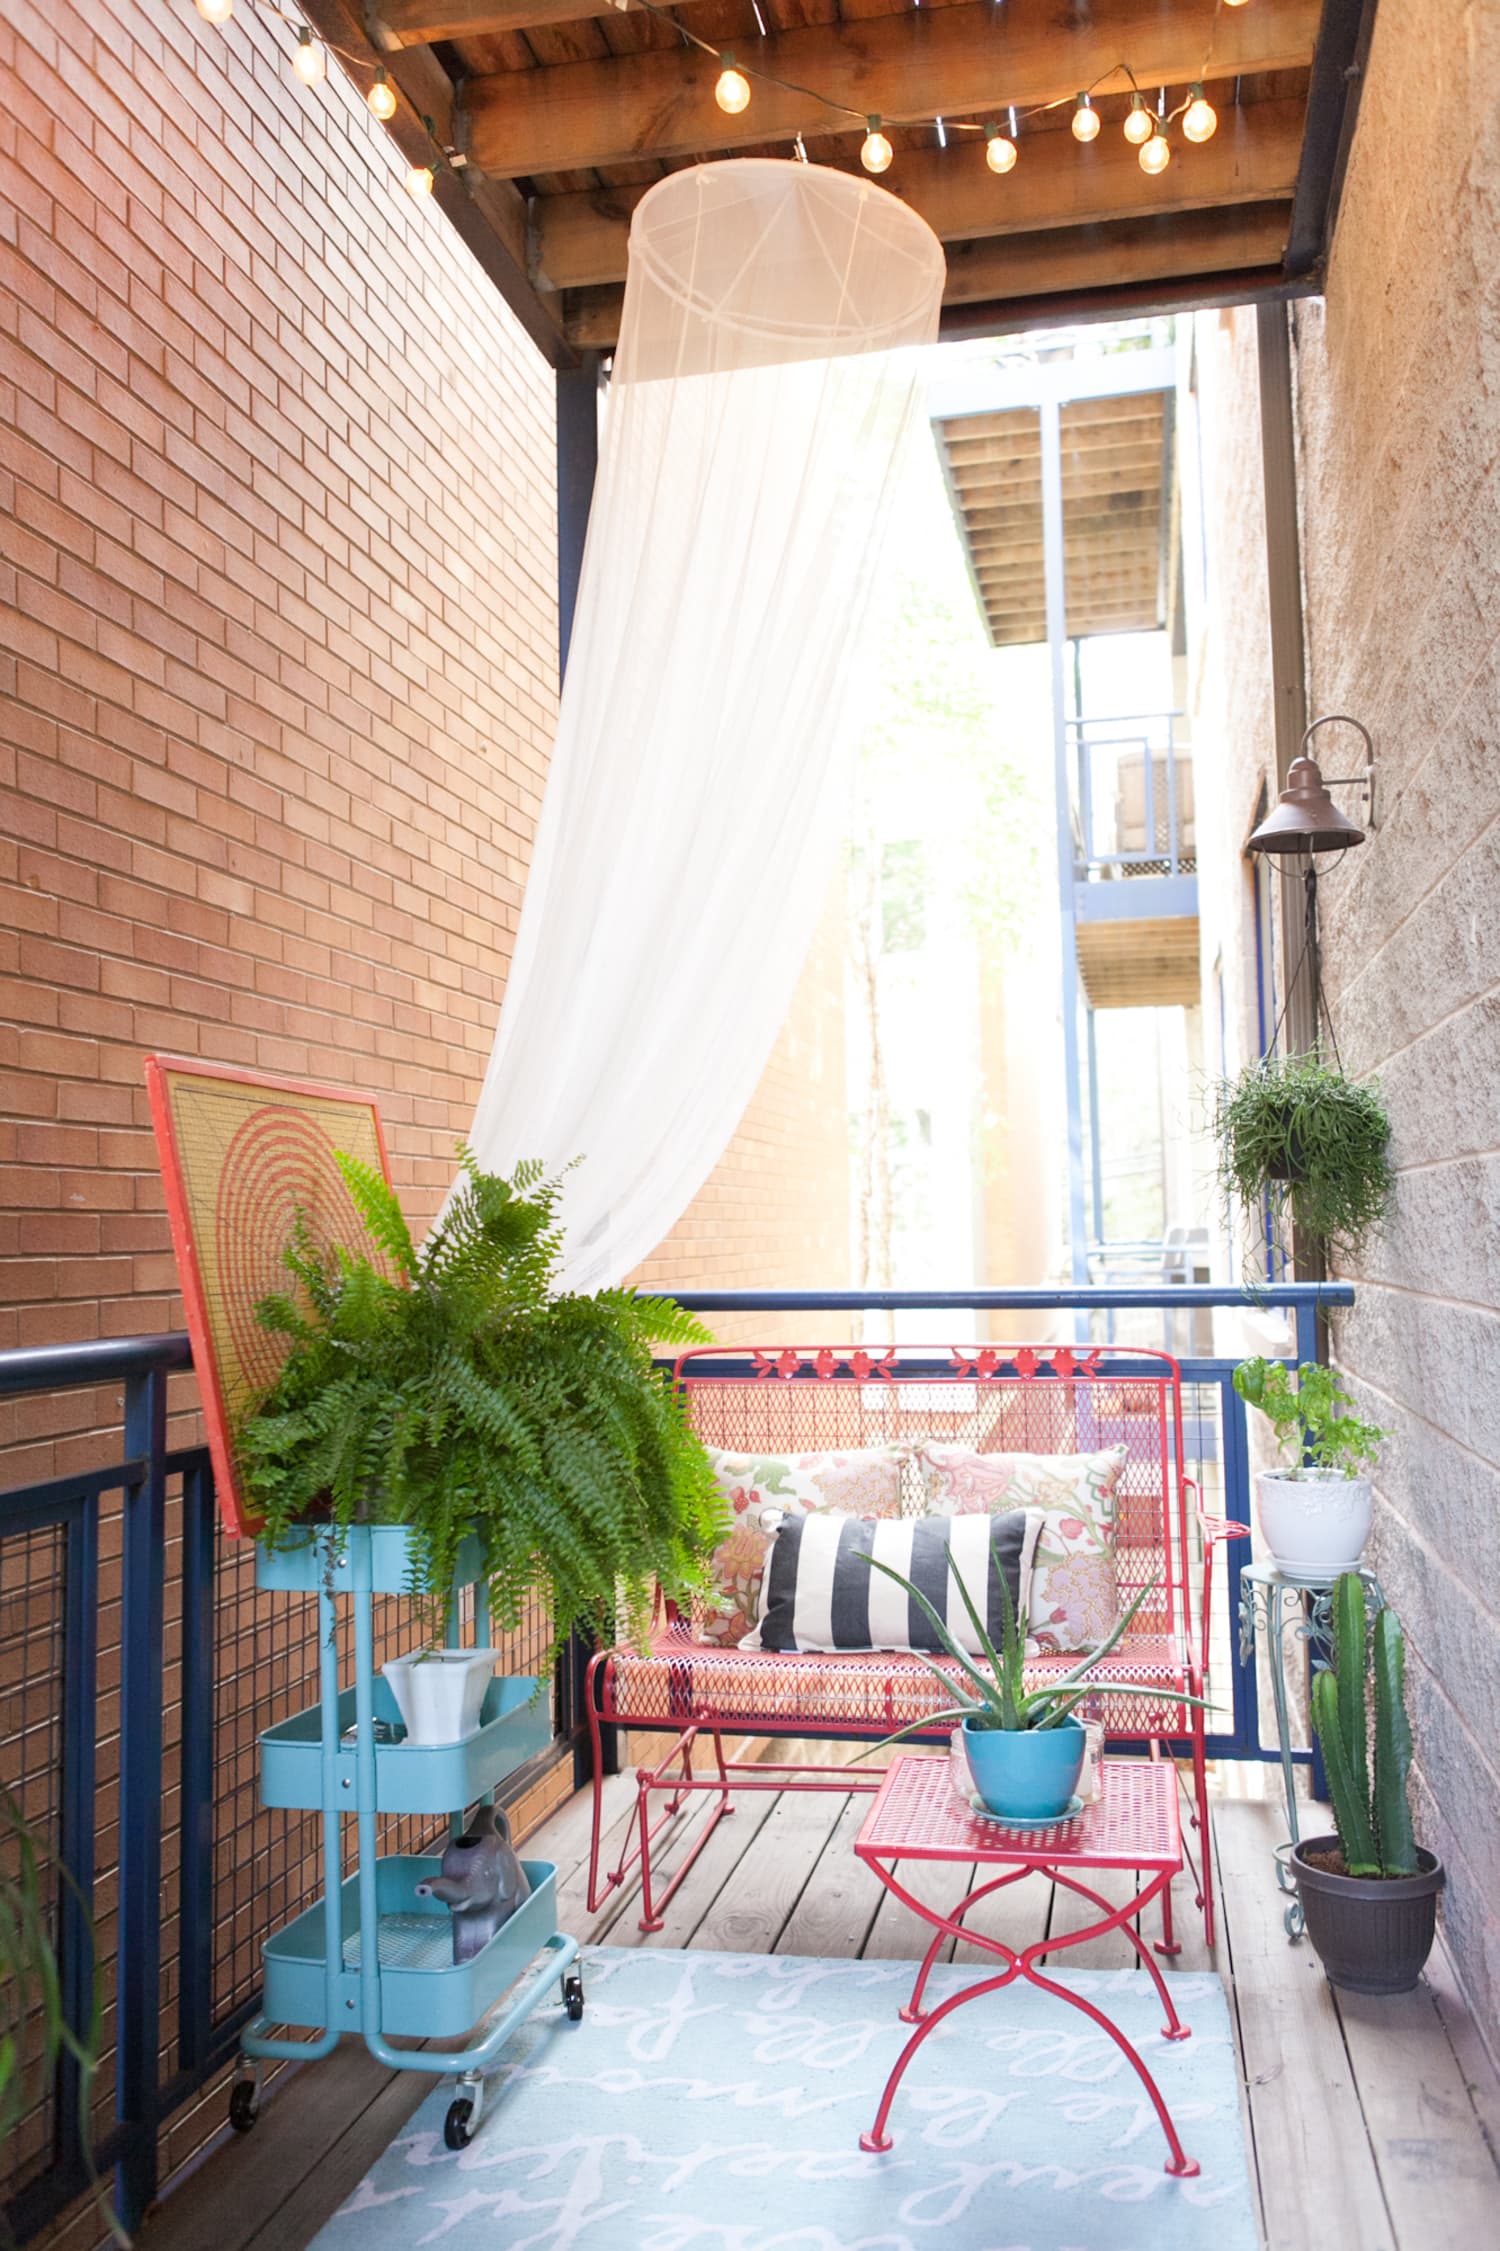 7 Sources for Budget Outdoor Furniture